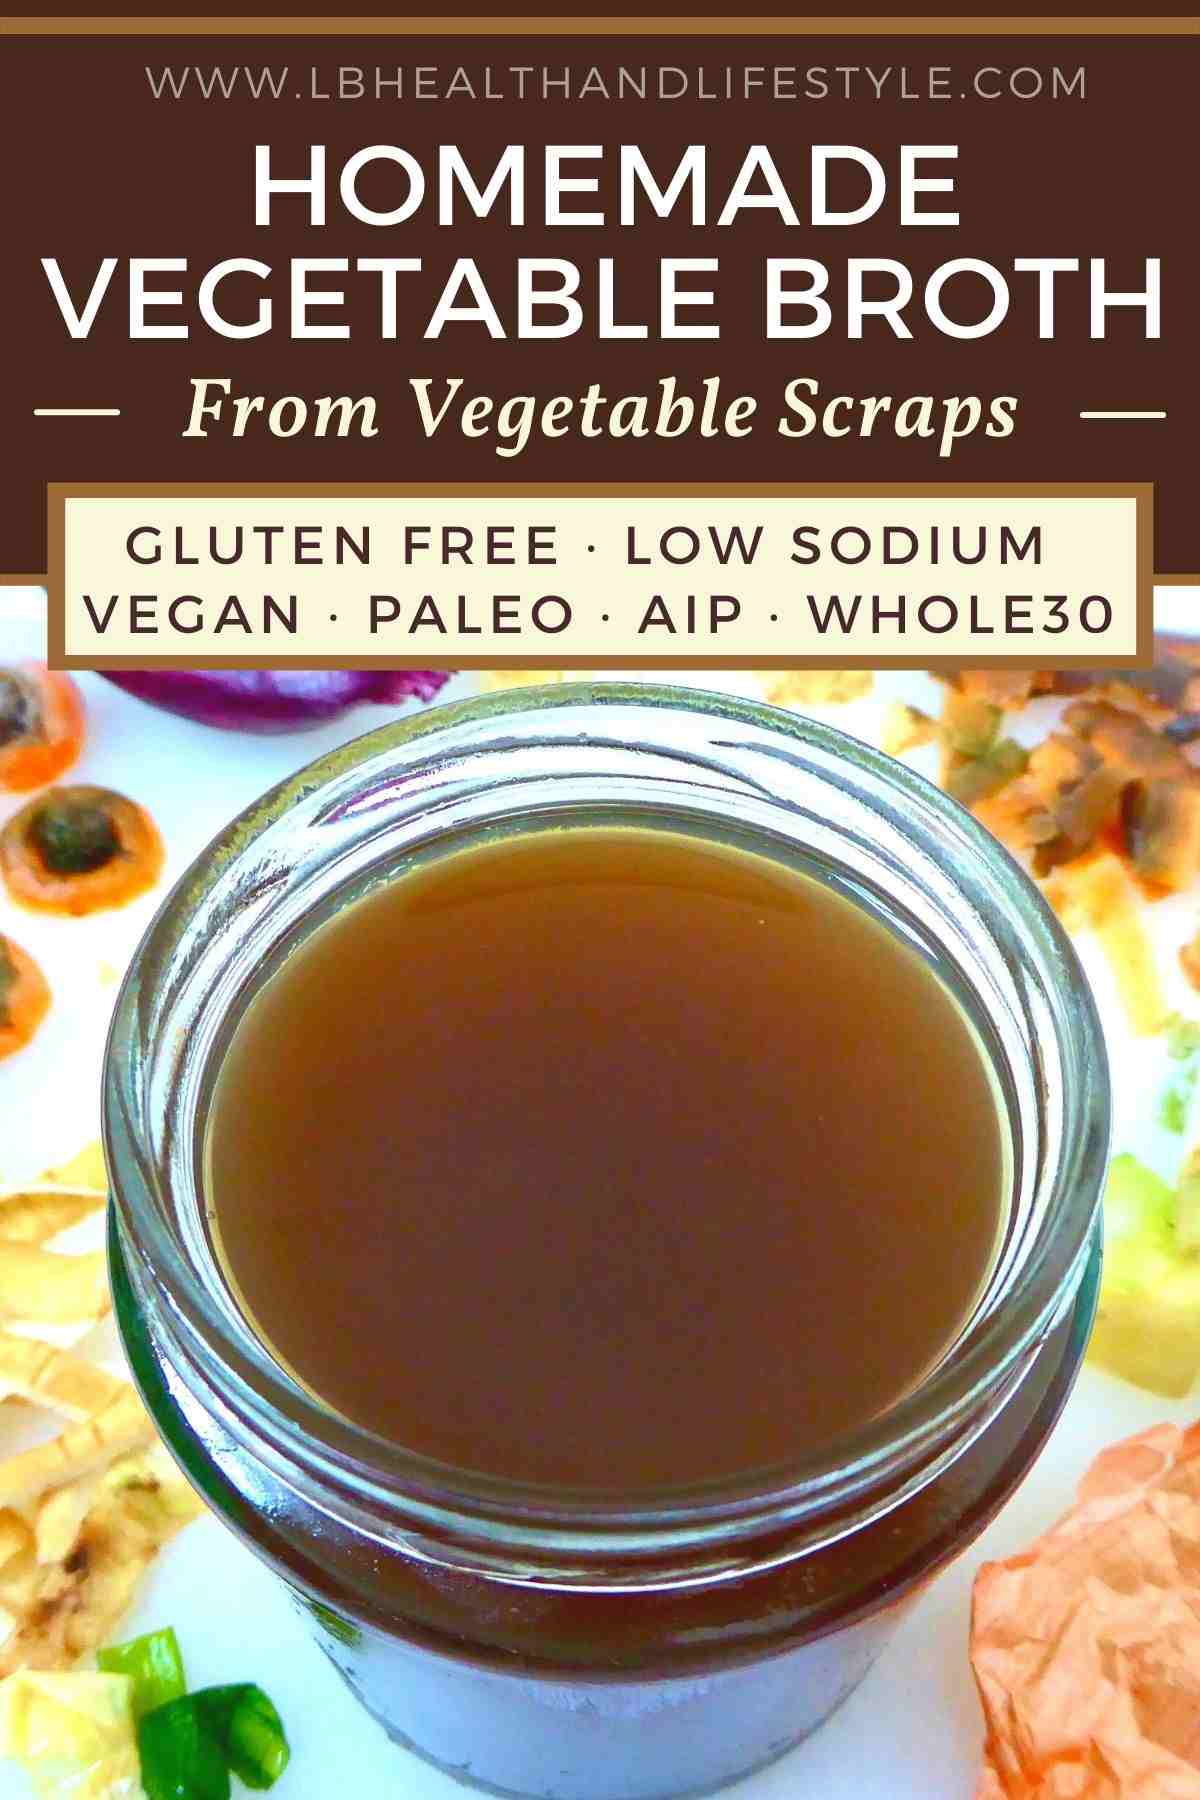 homemade vegetable broth dietary requirements gluten free low sodium vegan paleo aip whole30